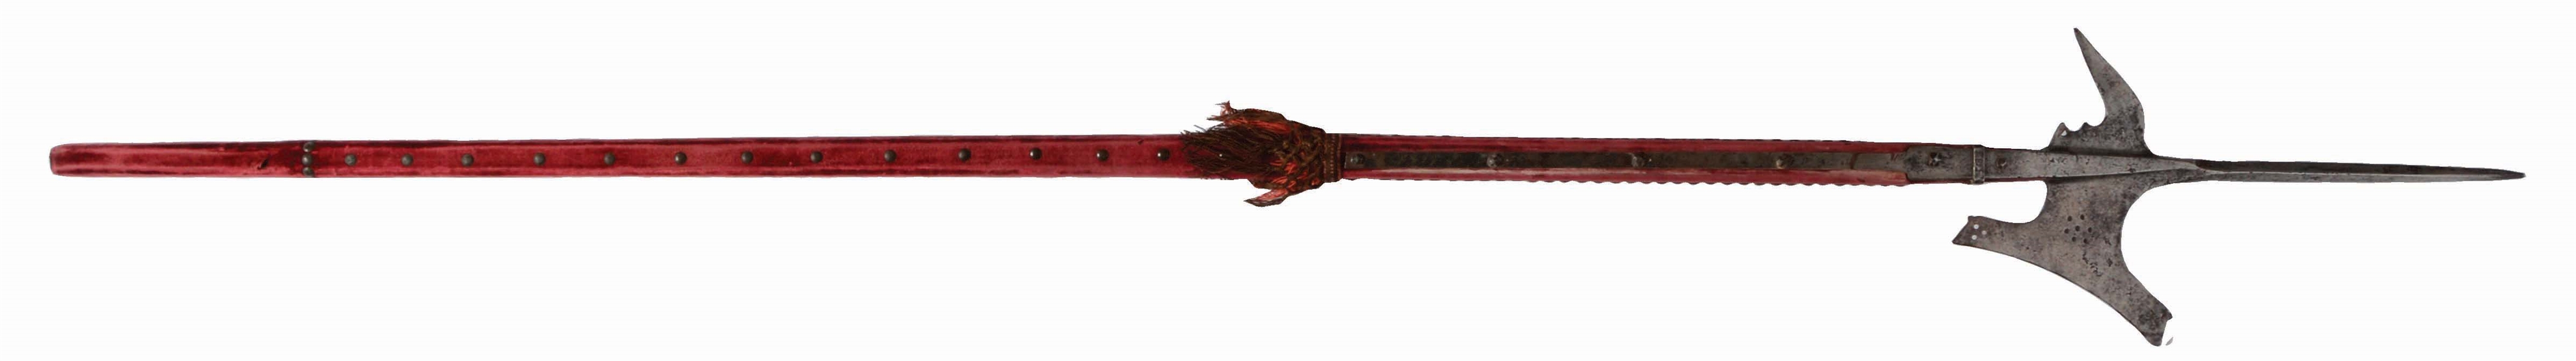 LATE 16TH CENTURY EUROPEAN HALBERD WITH PIERCED BLADE AND ANTIQUE SHAFT. 